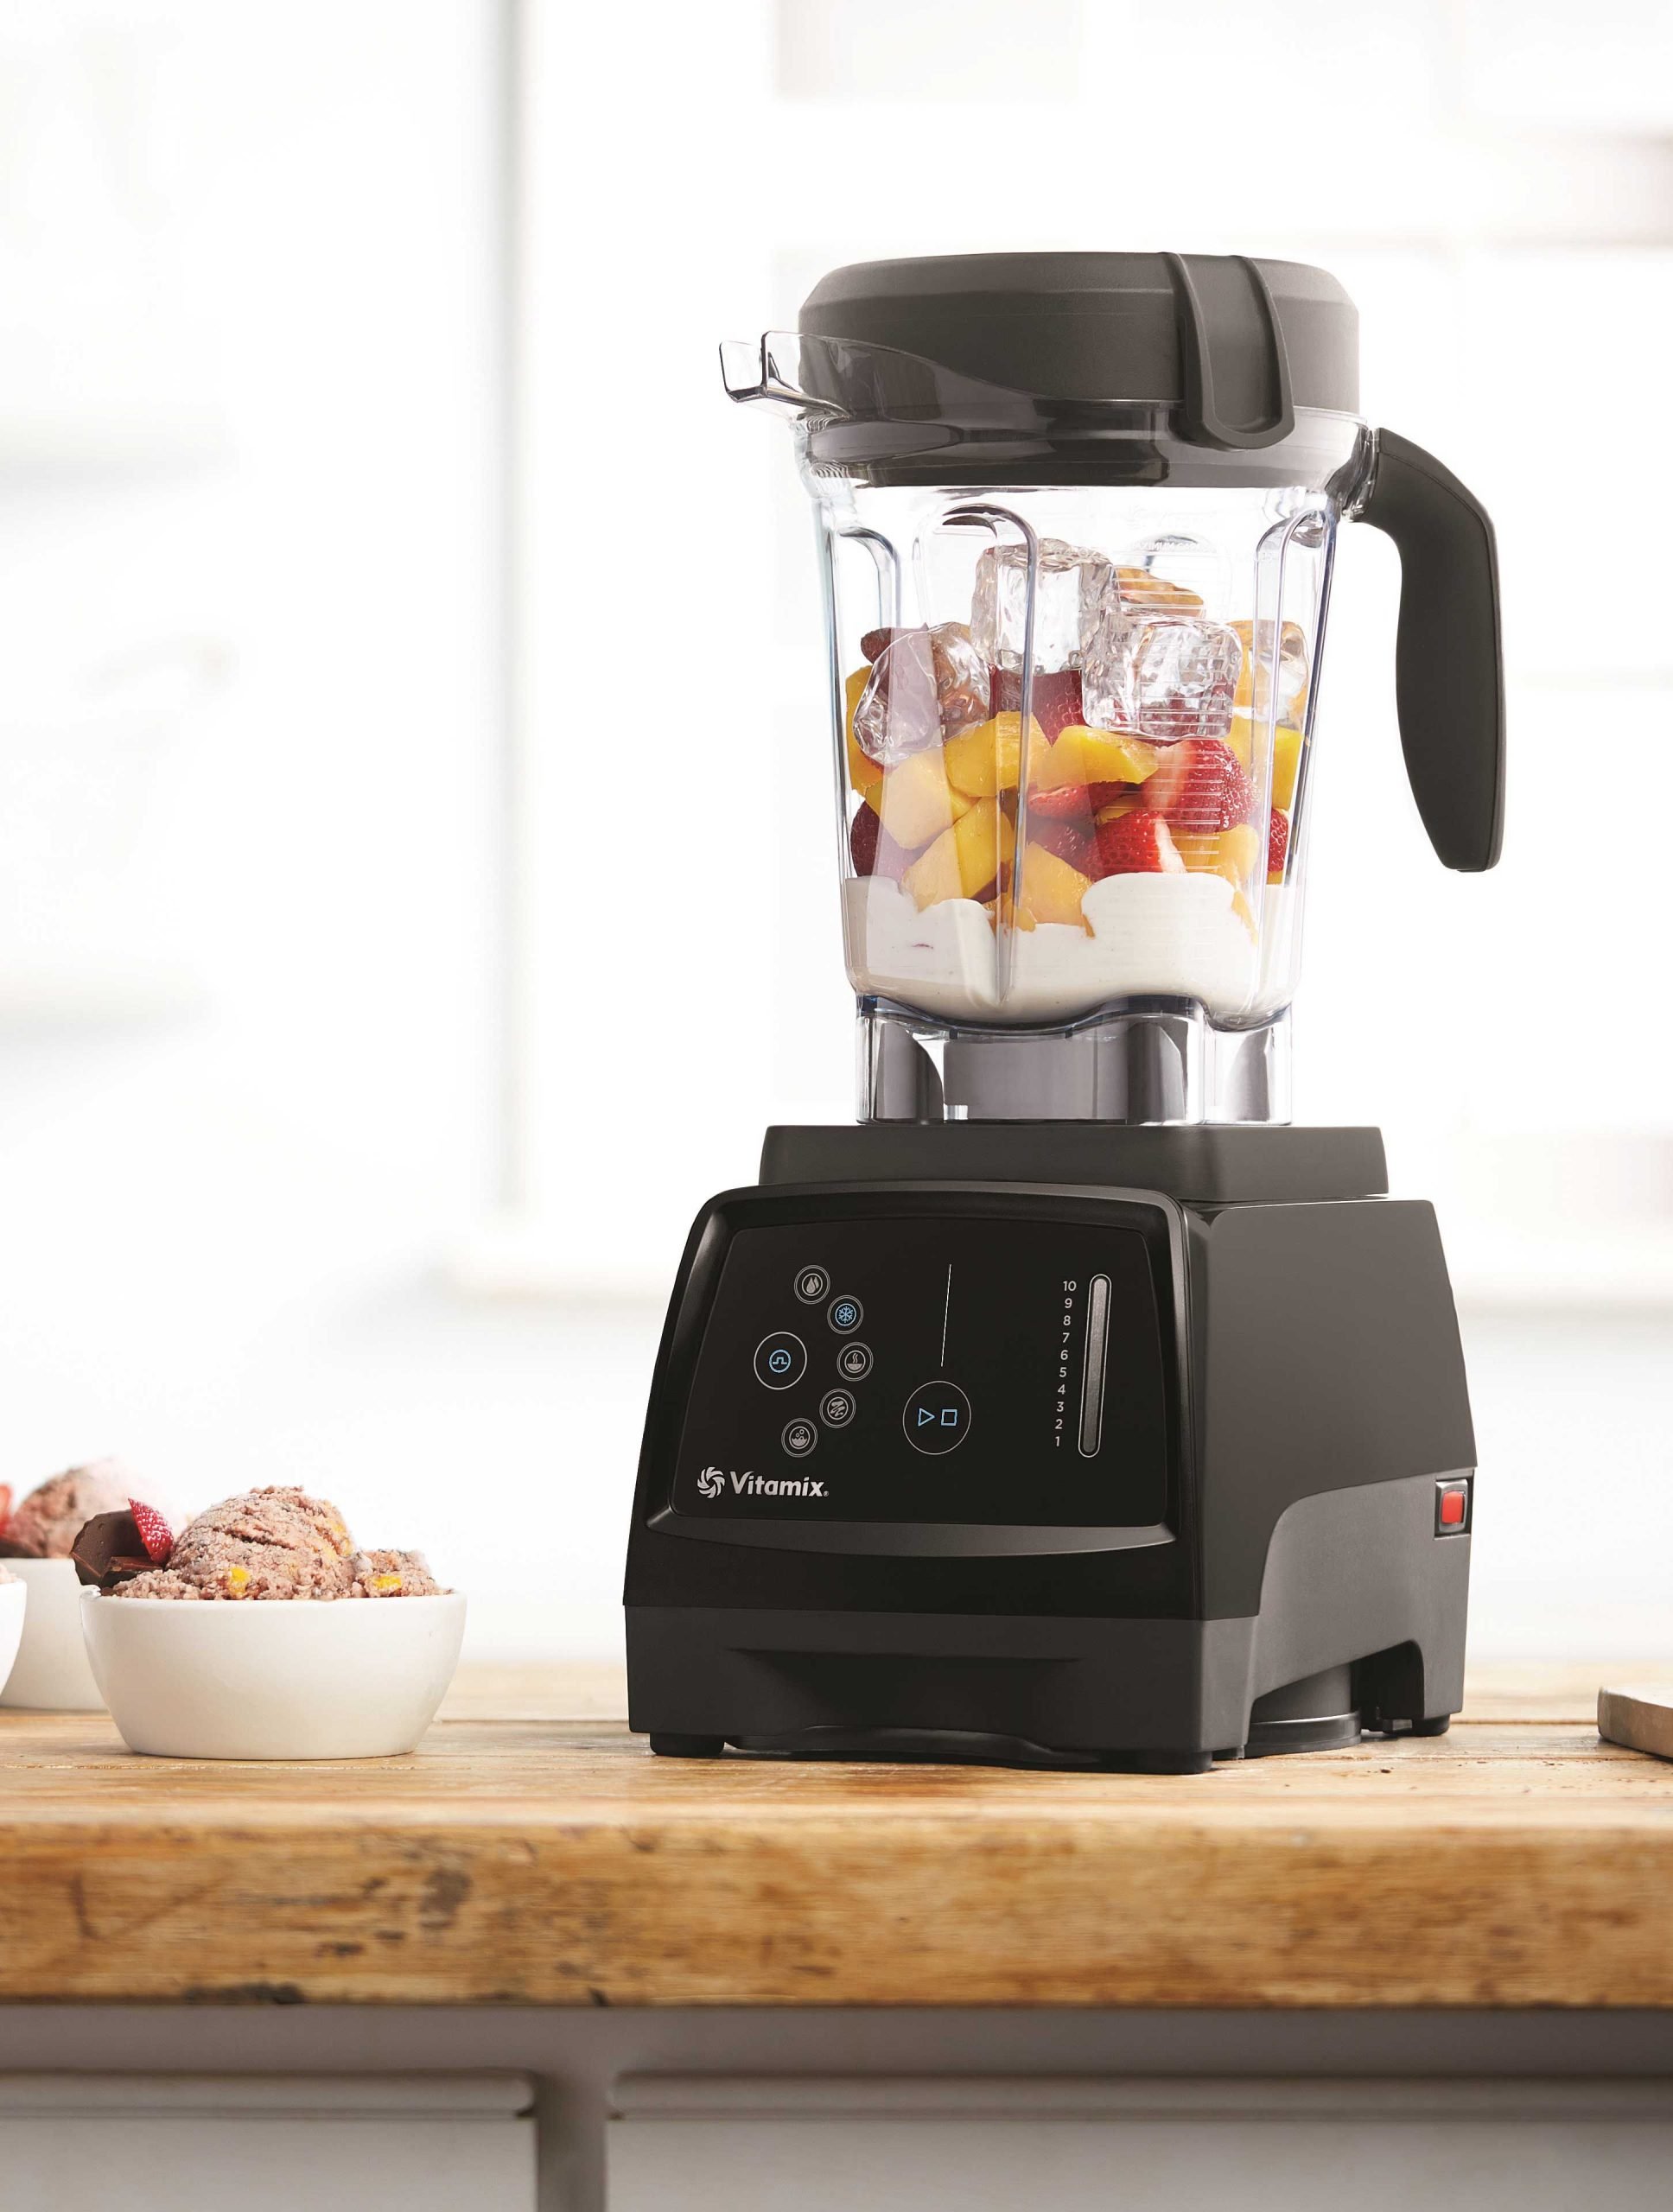 Our Newest Vitamix is sure to impress! The Vitamix 780 ...